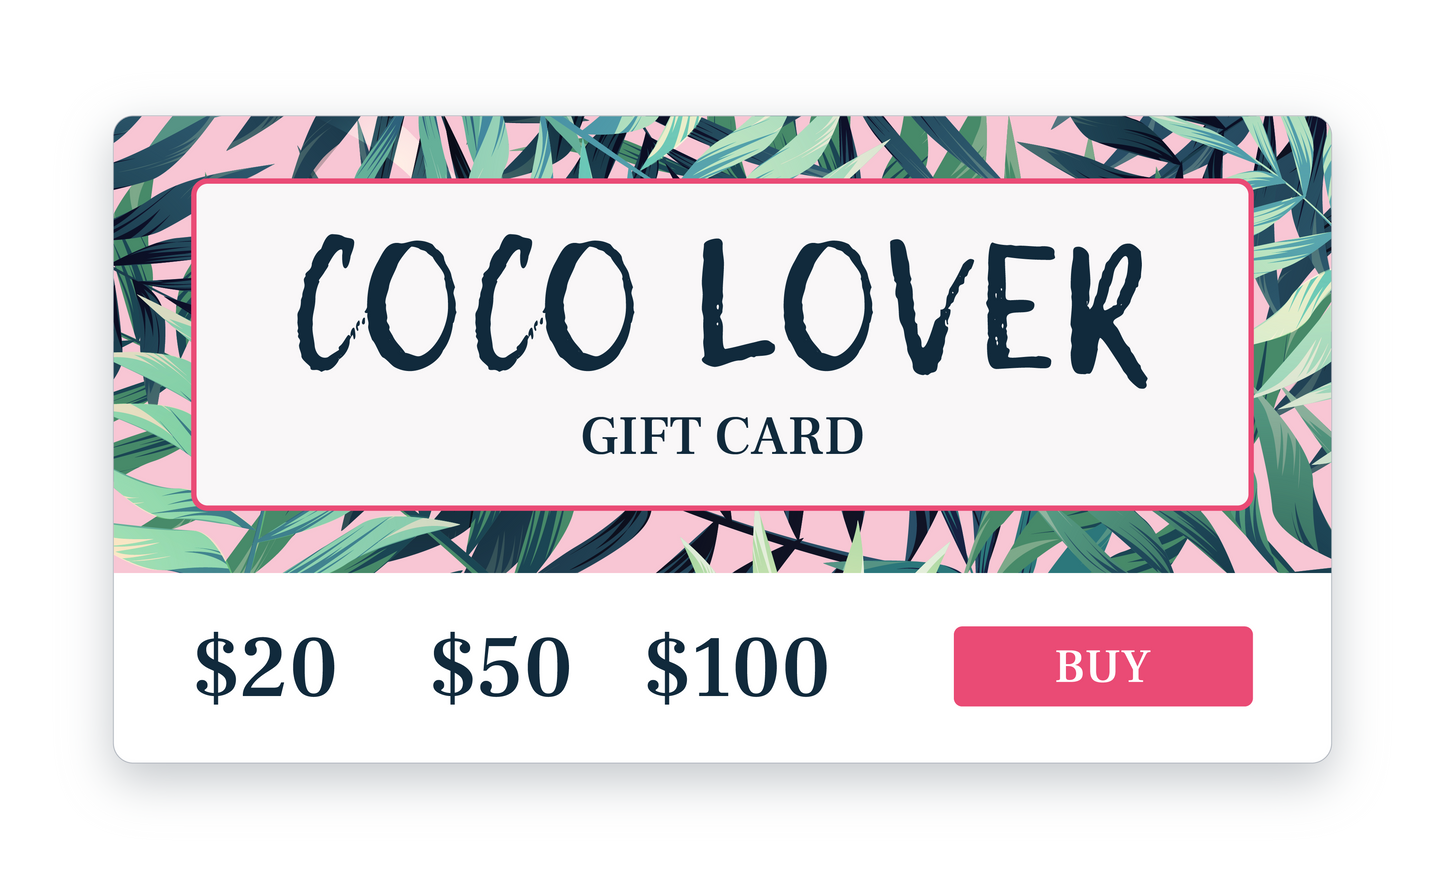 Coco Lover Gift Card